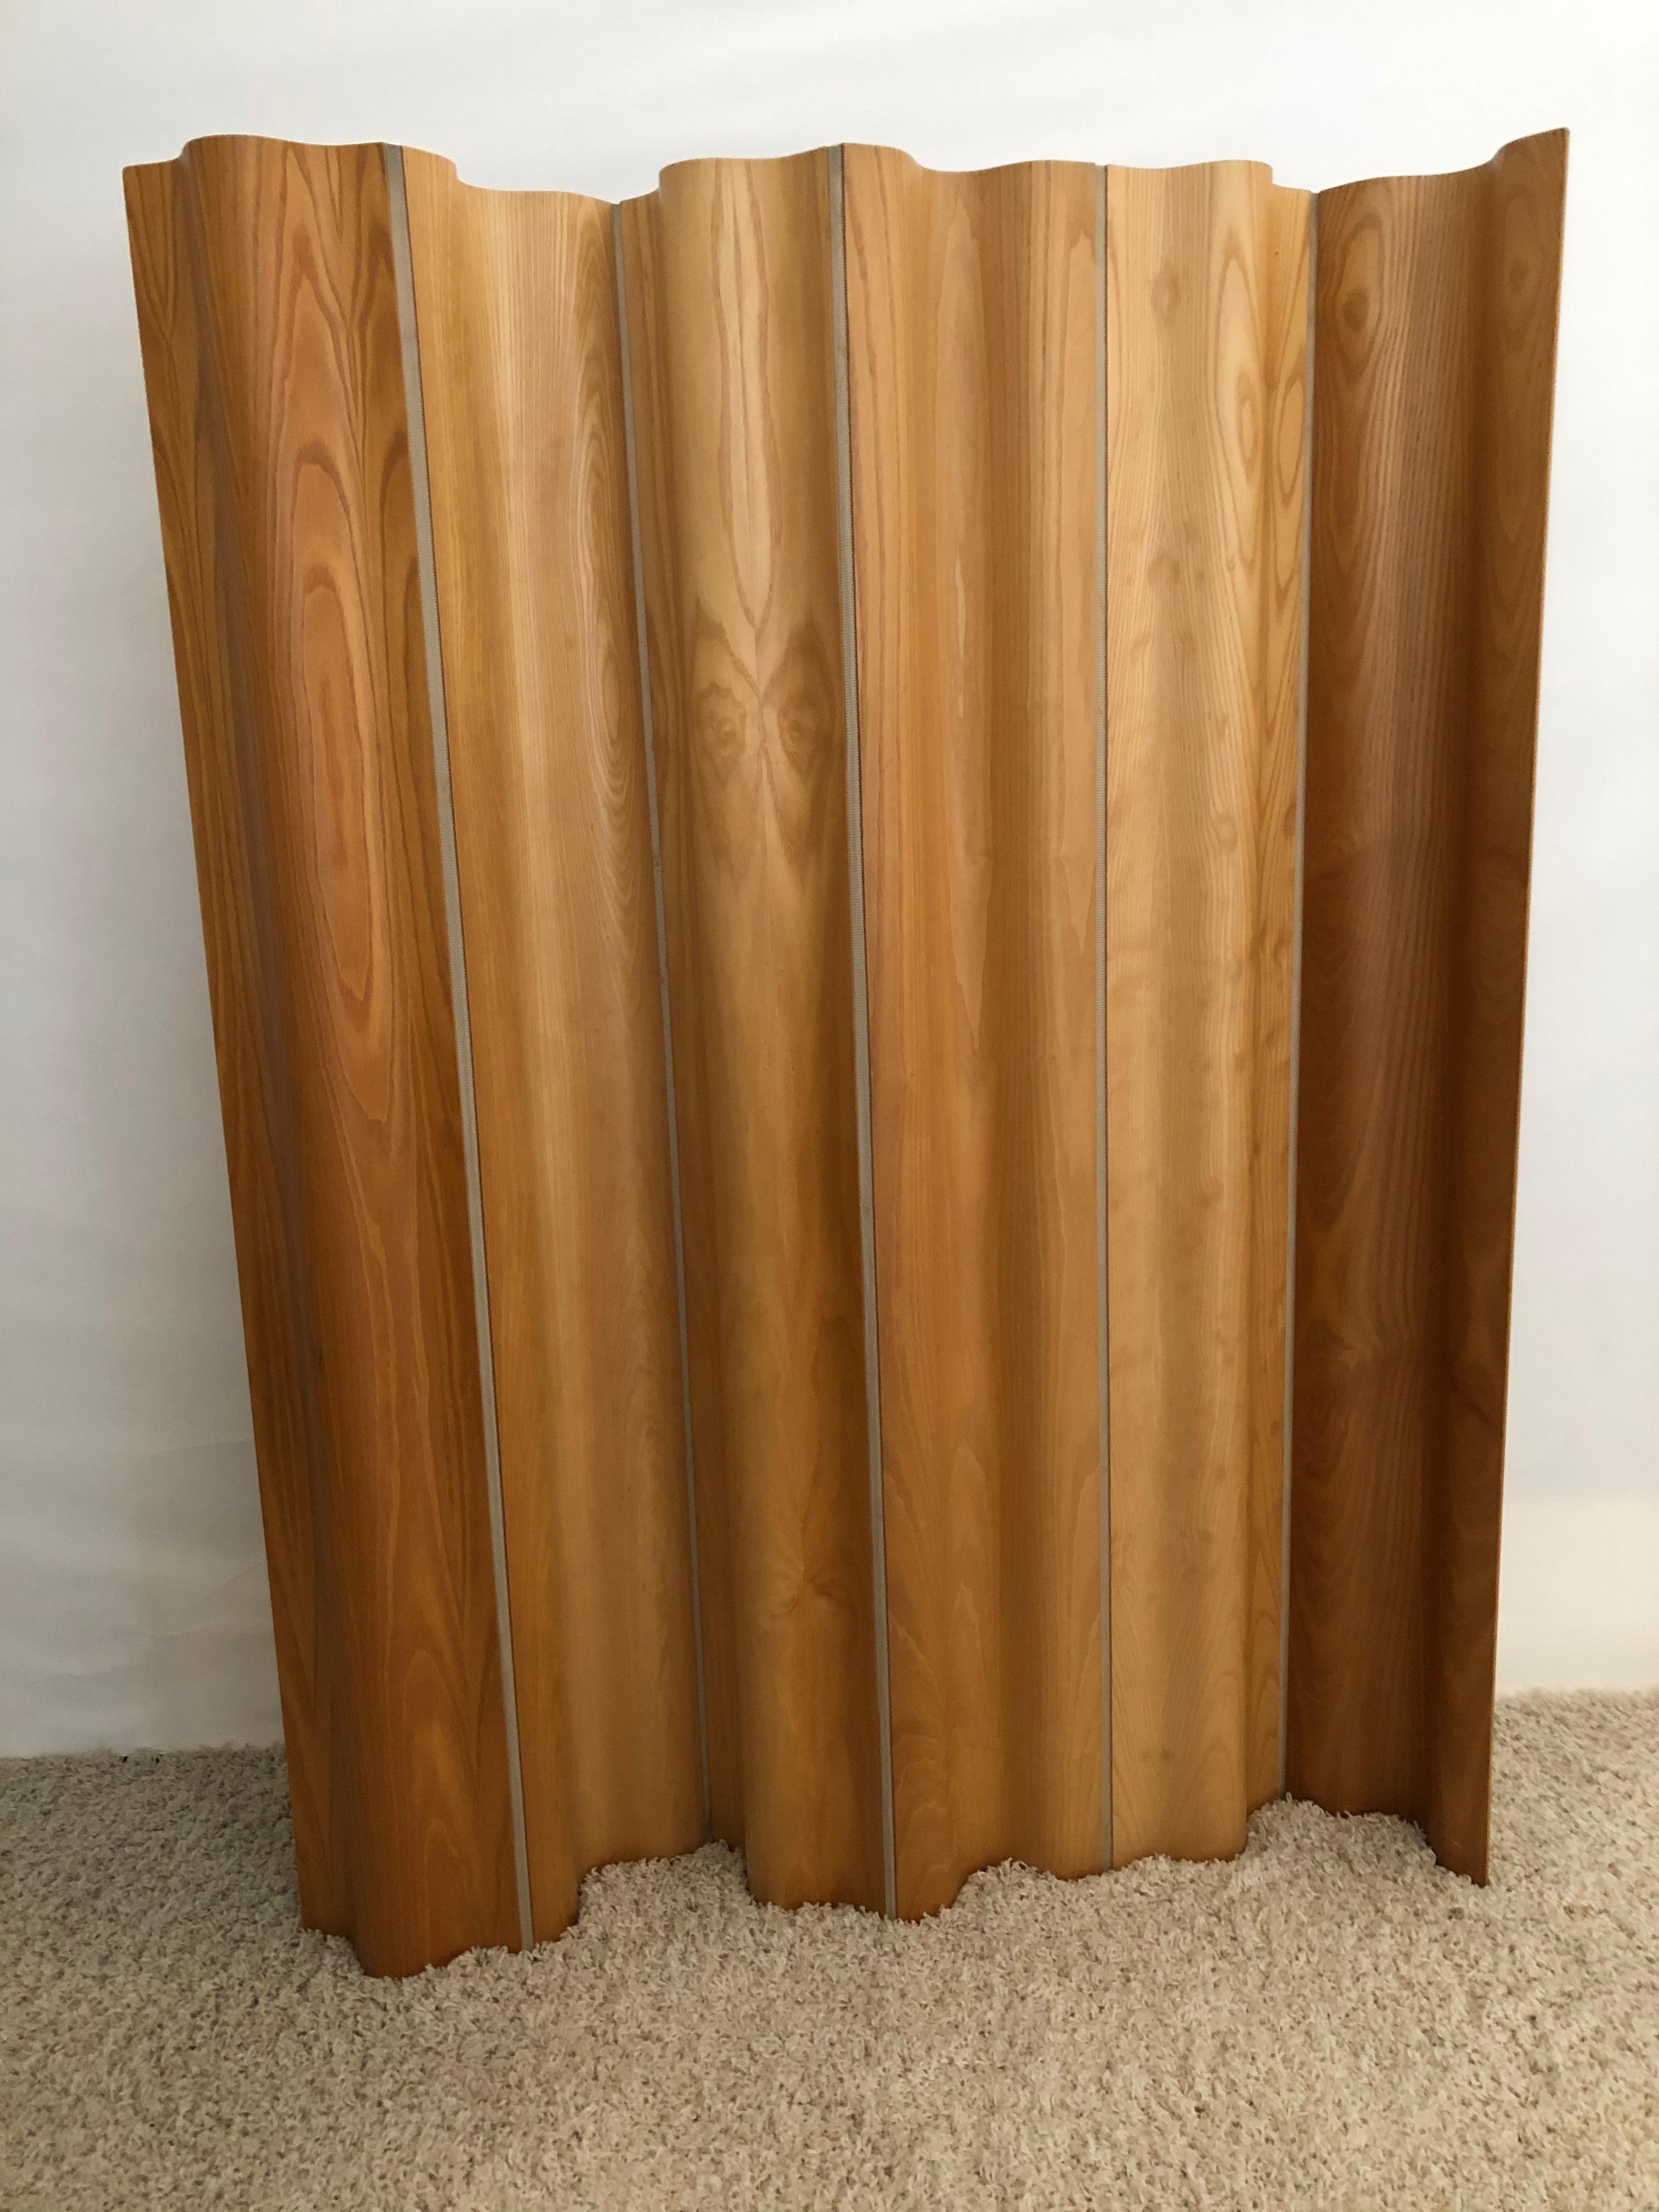 Charles and Ray Eames Iconic two sided molded plywood folding screen, appears to be two different shades of wood each side, shown in photos. Woven canvas in between 6 panels, FSW-6 in original very good fine condition. Very slight imperfections.